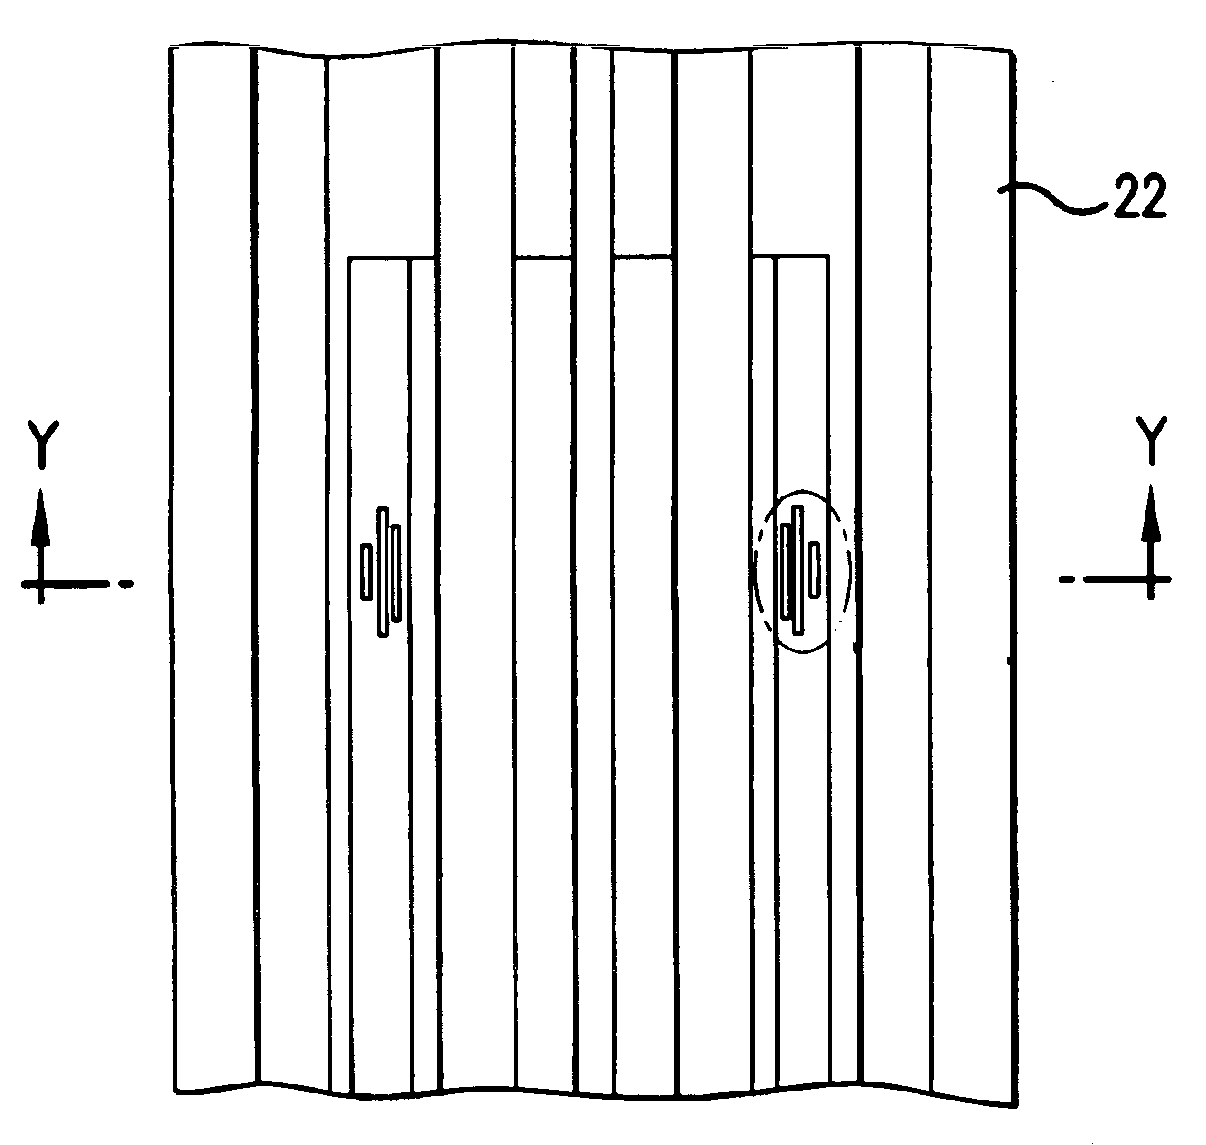 Magnetic recording medium comprising a magnetic layer having specific thickness, surface roughness and friction coefficient